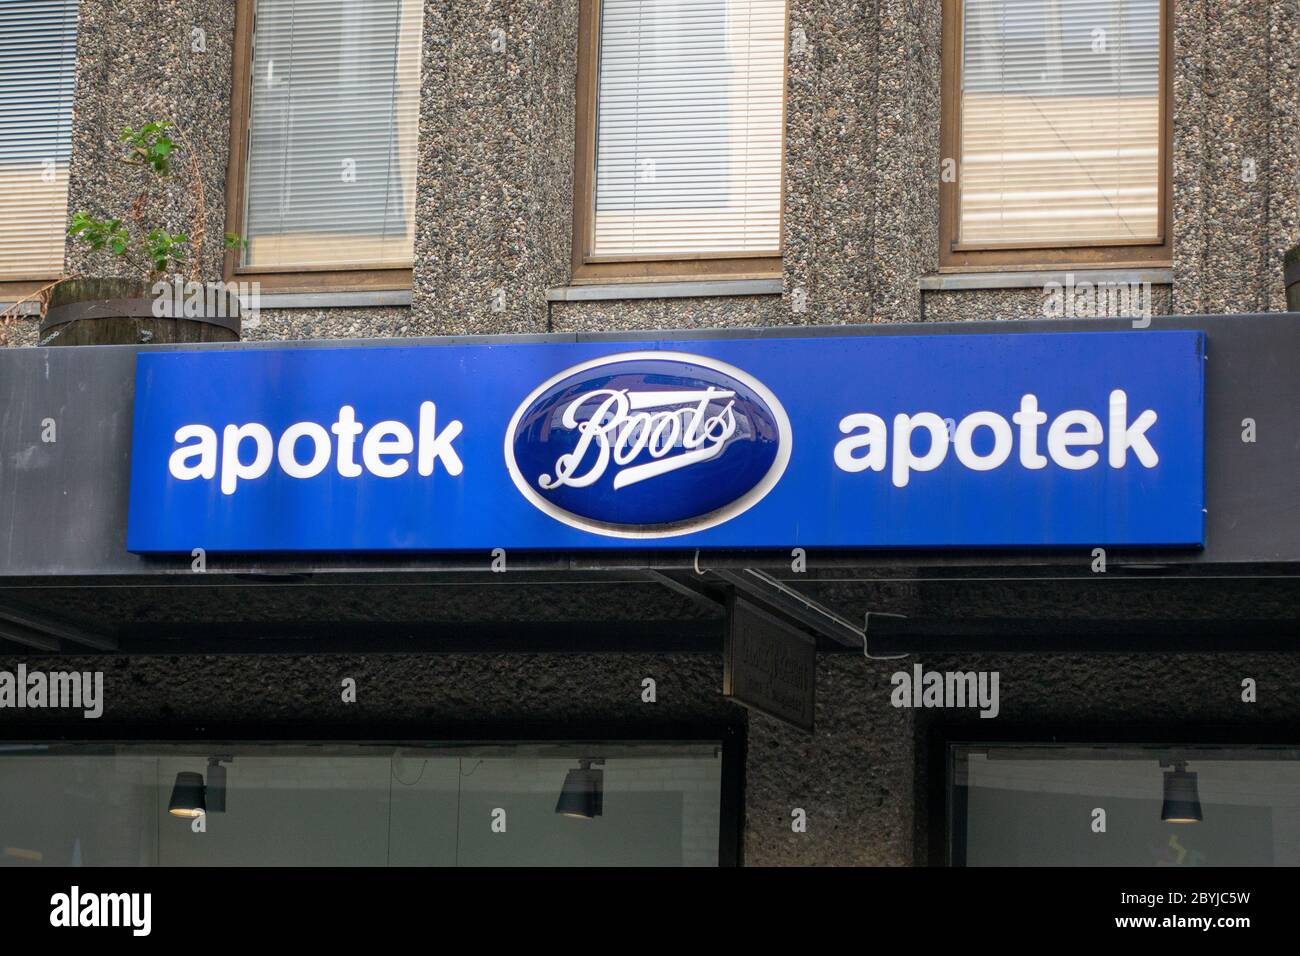 A Branch Of British Boots The Chemist Store Apotek Pharmacy In Kristiansand  Norway Stock Photo - Alamy